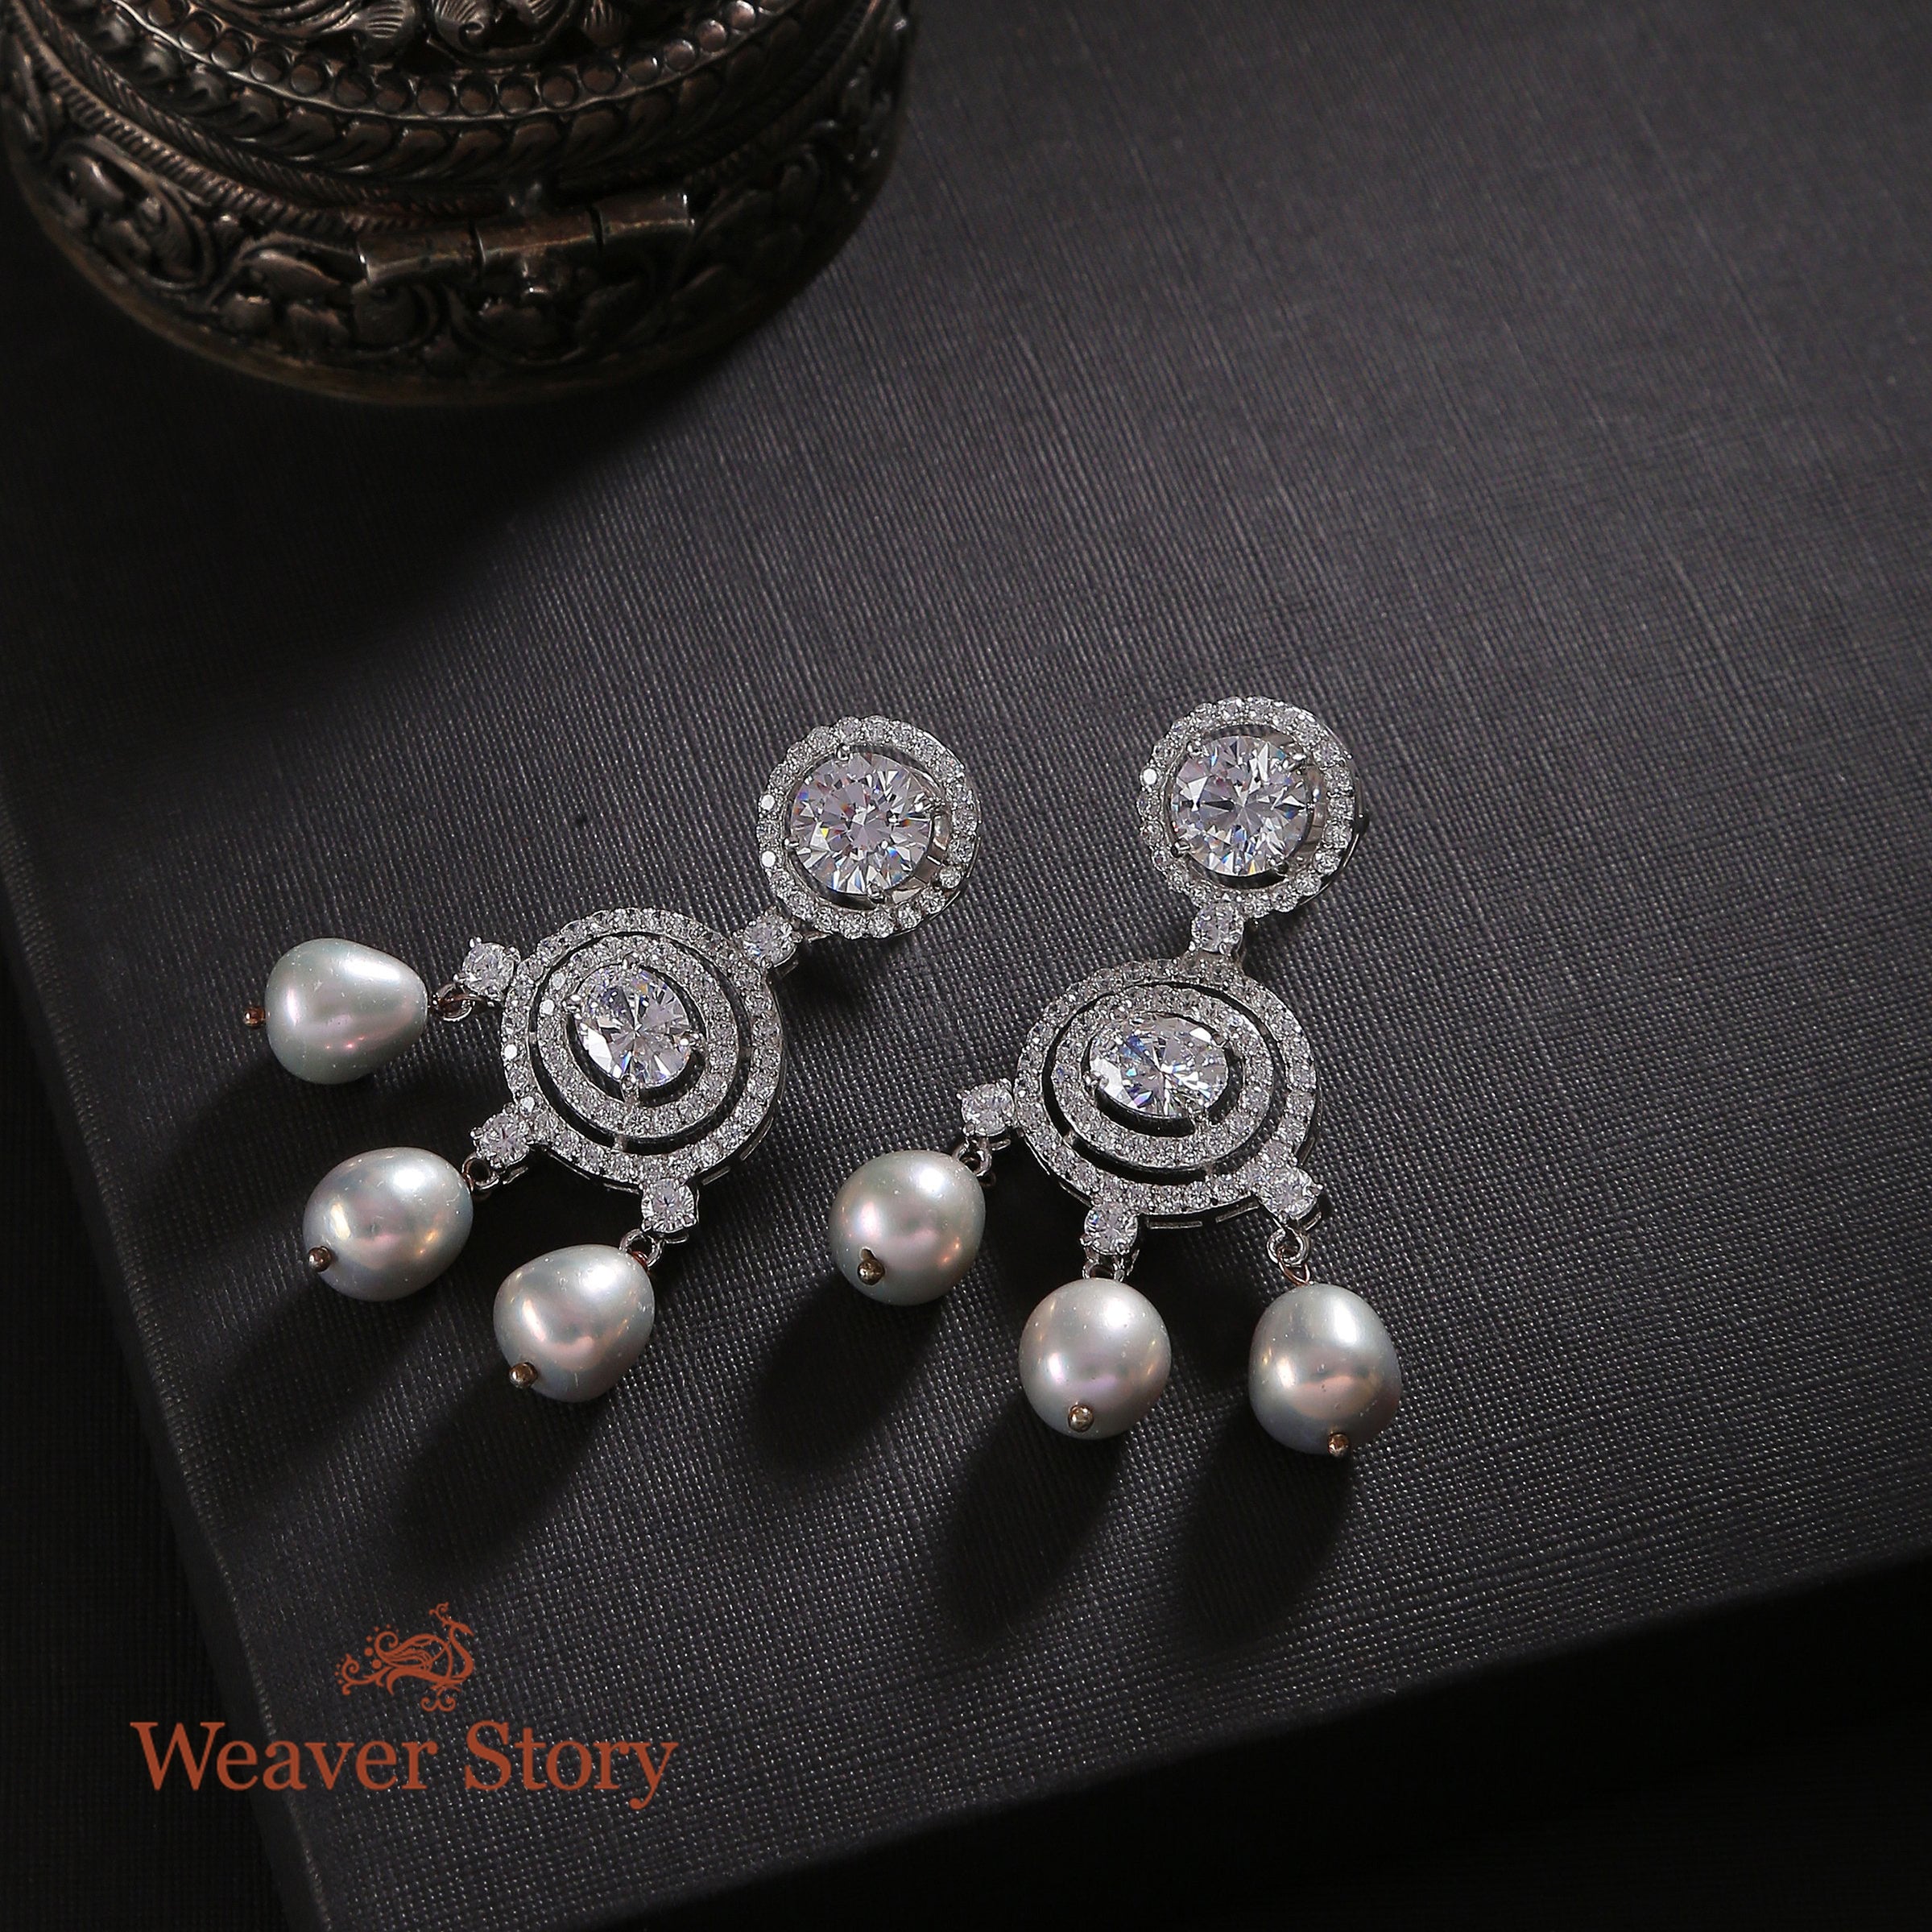 Shahina_Earrings_with_Zircons_Crafted_in_Pure_Silver_WeaverStory_01